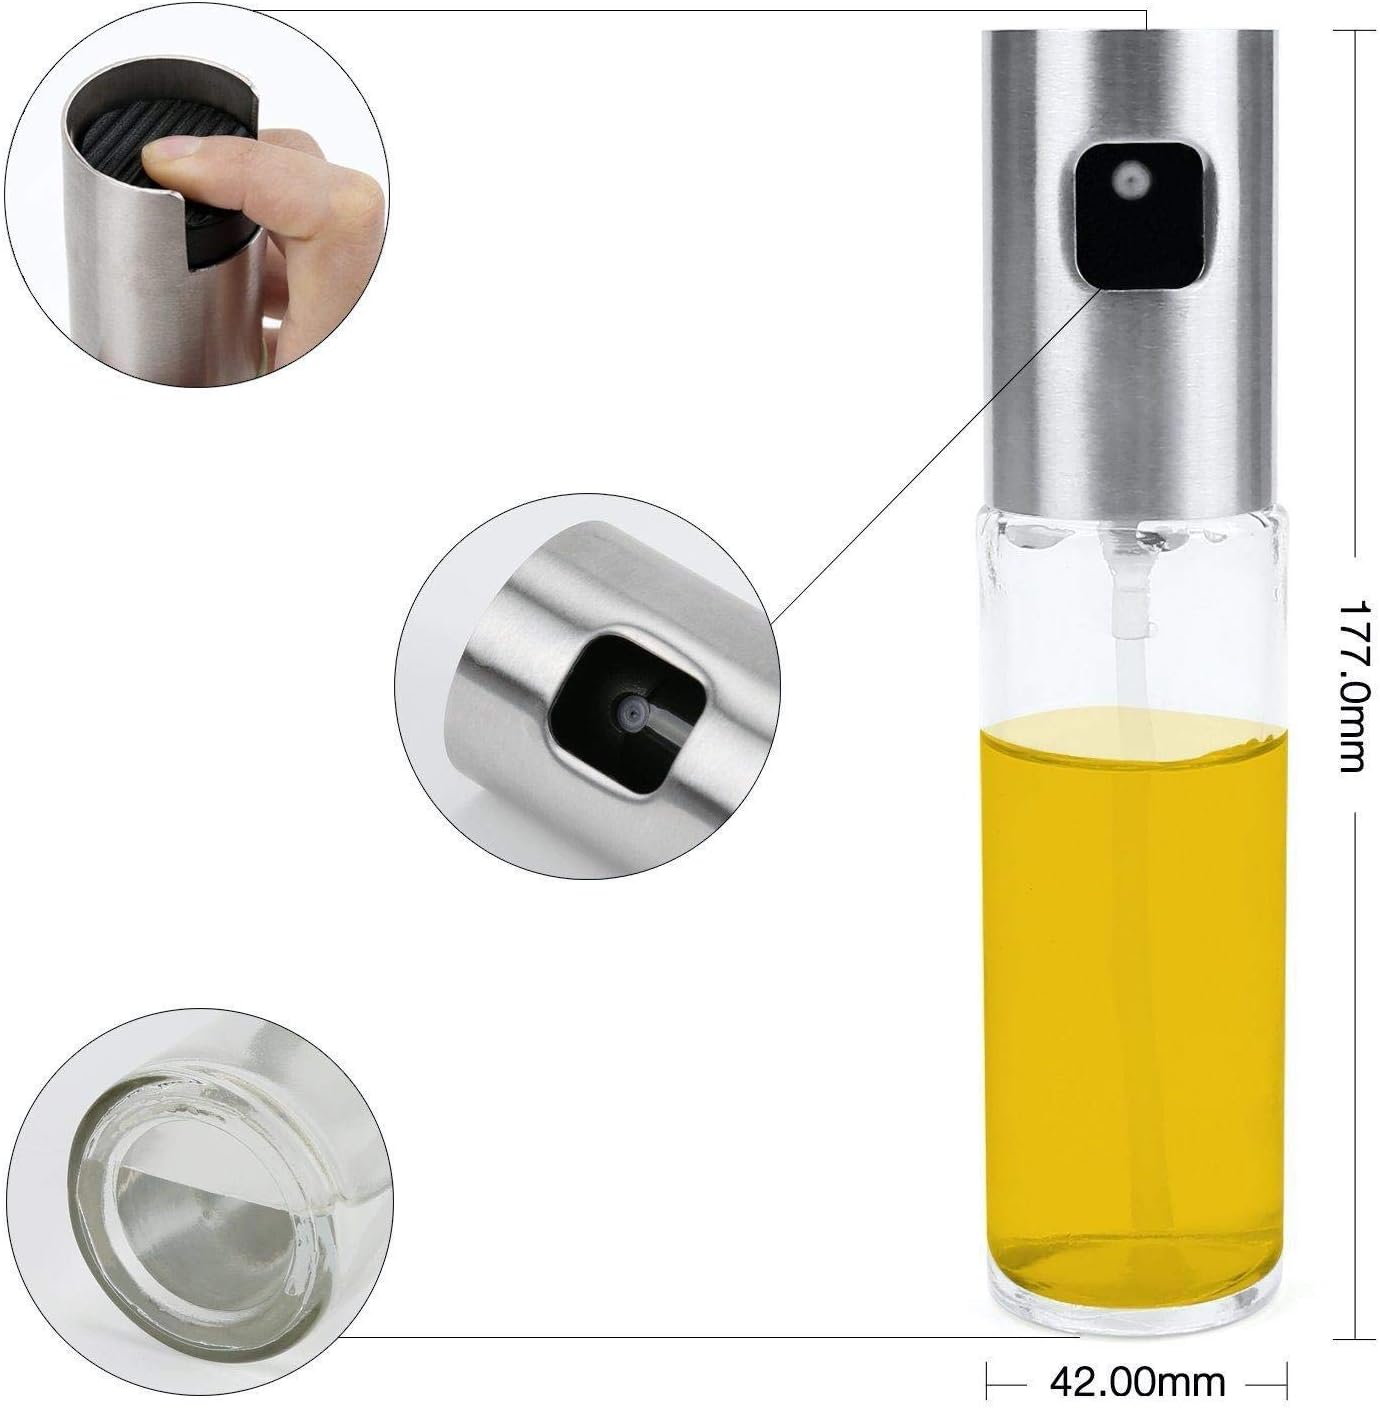 Olive Oil Sprayer For Cooking